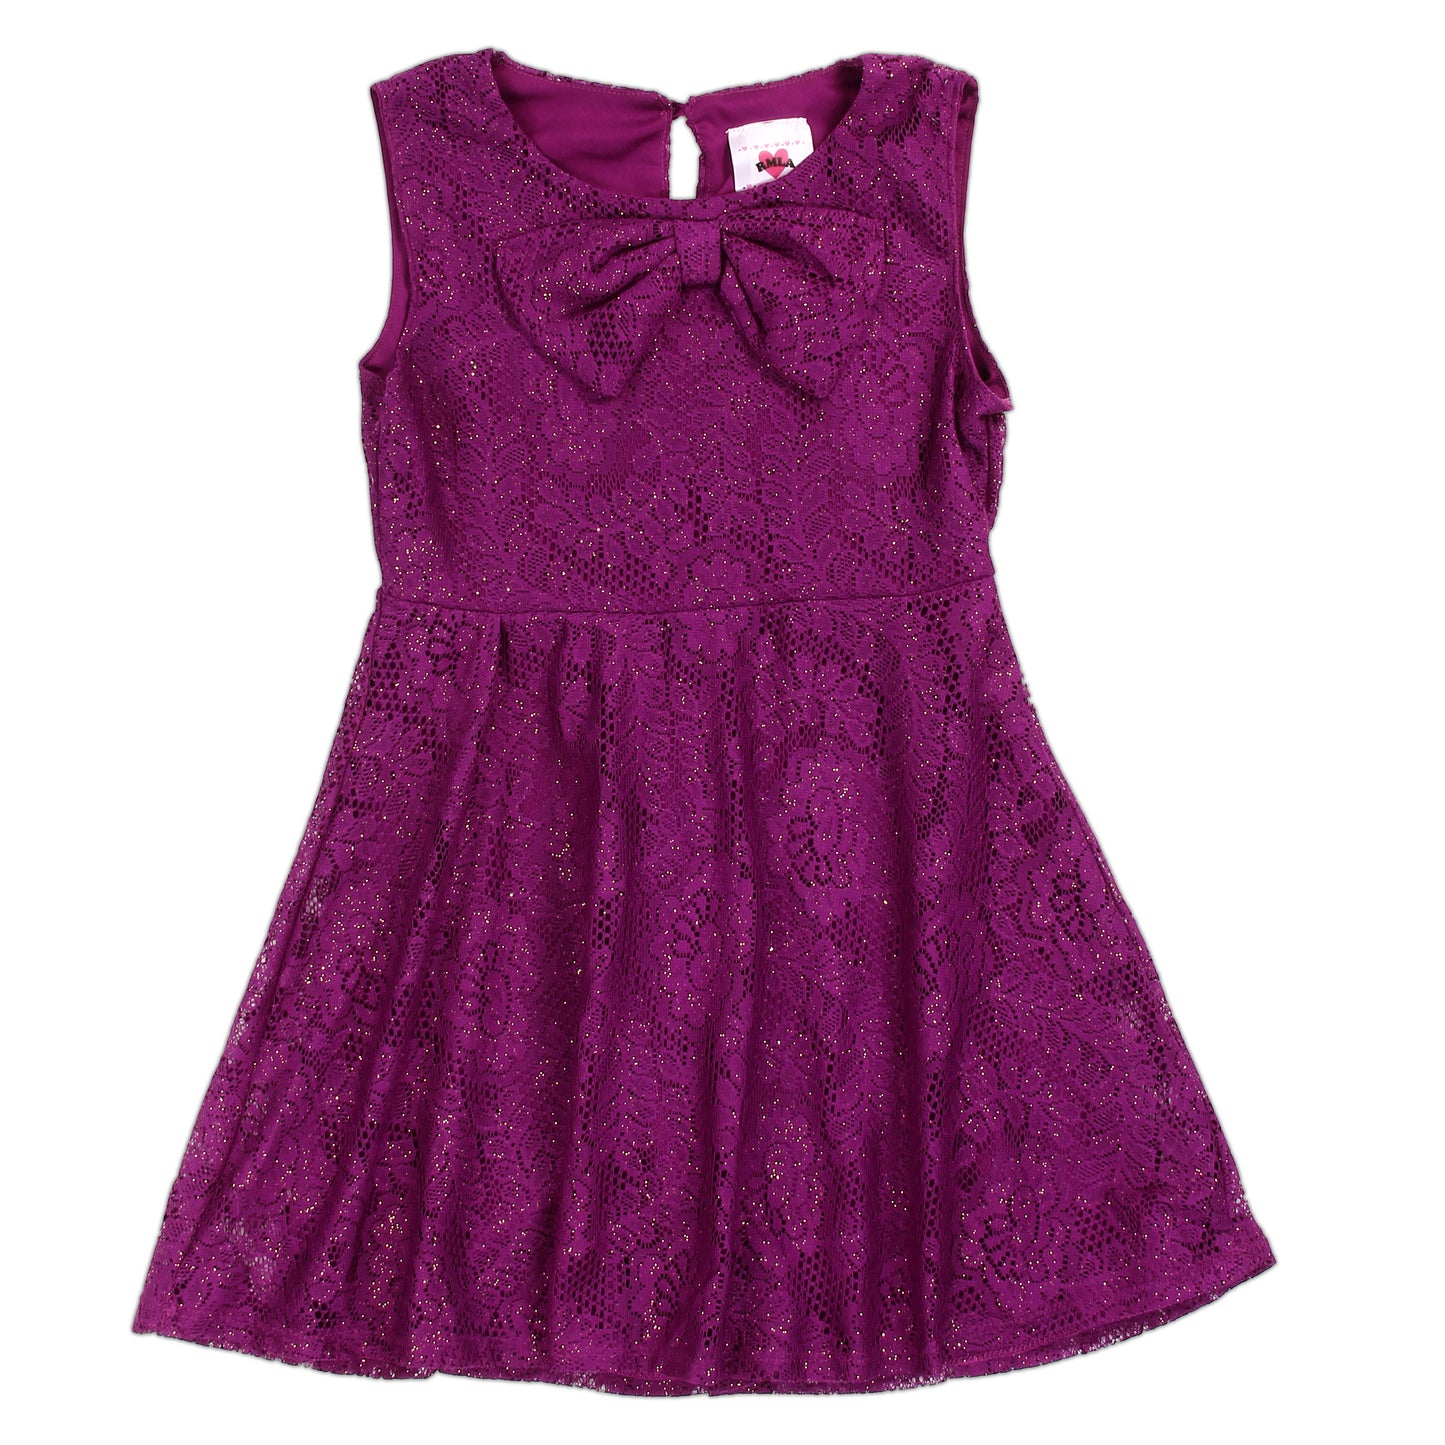 RMLA Girls 4-6X Bow Front Glitter Lace Dress (Pack of 6)